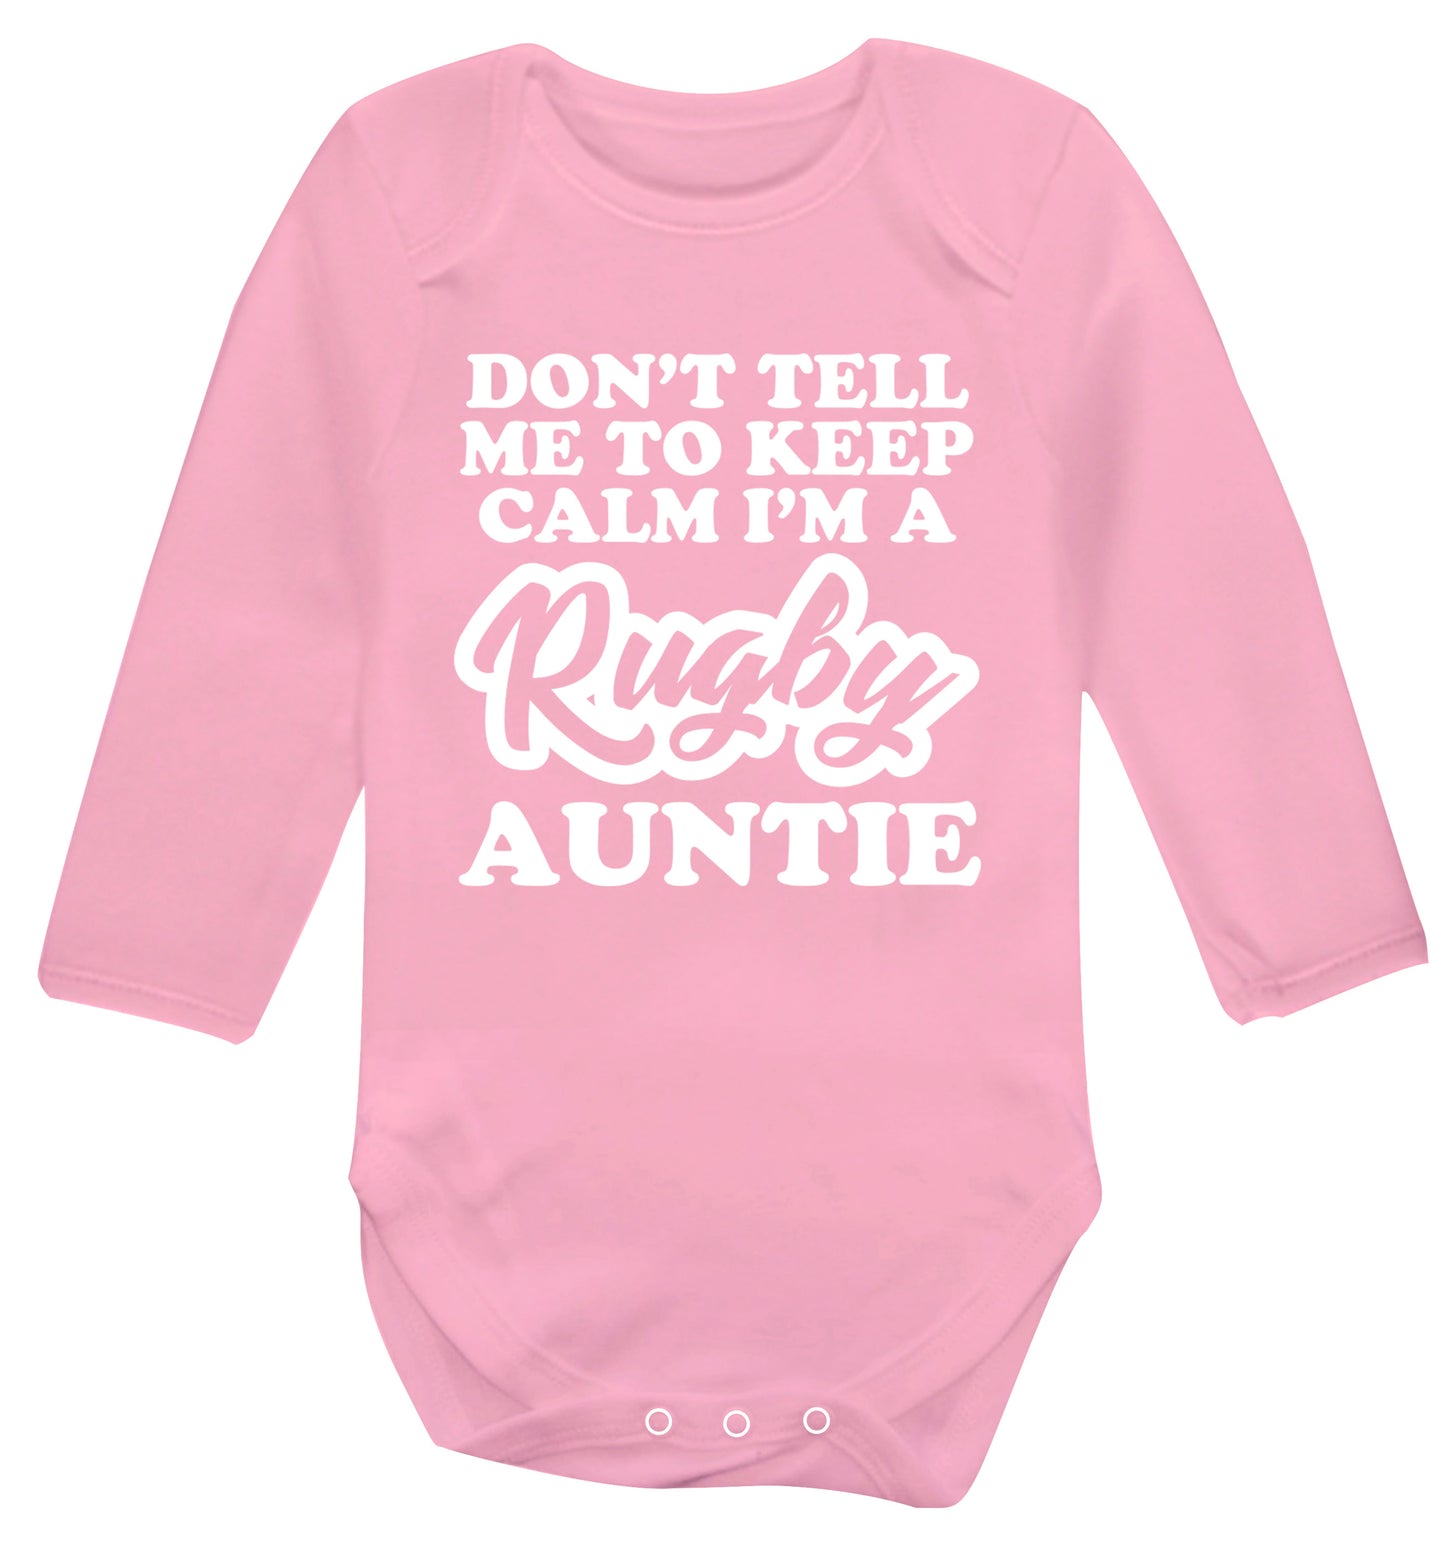 Don't tell me keep calm I'm a rugby auntie Baby Vest long sleeved pale pink 6-12 months